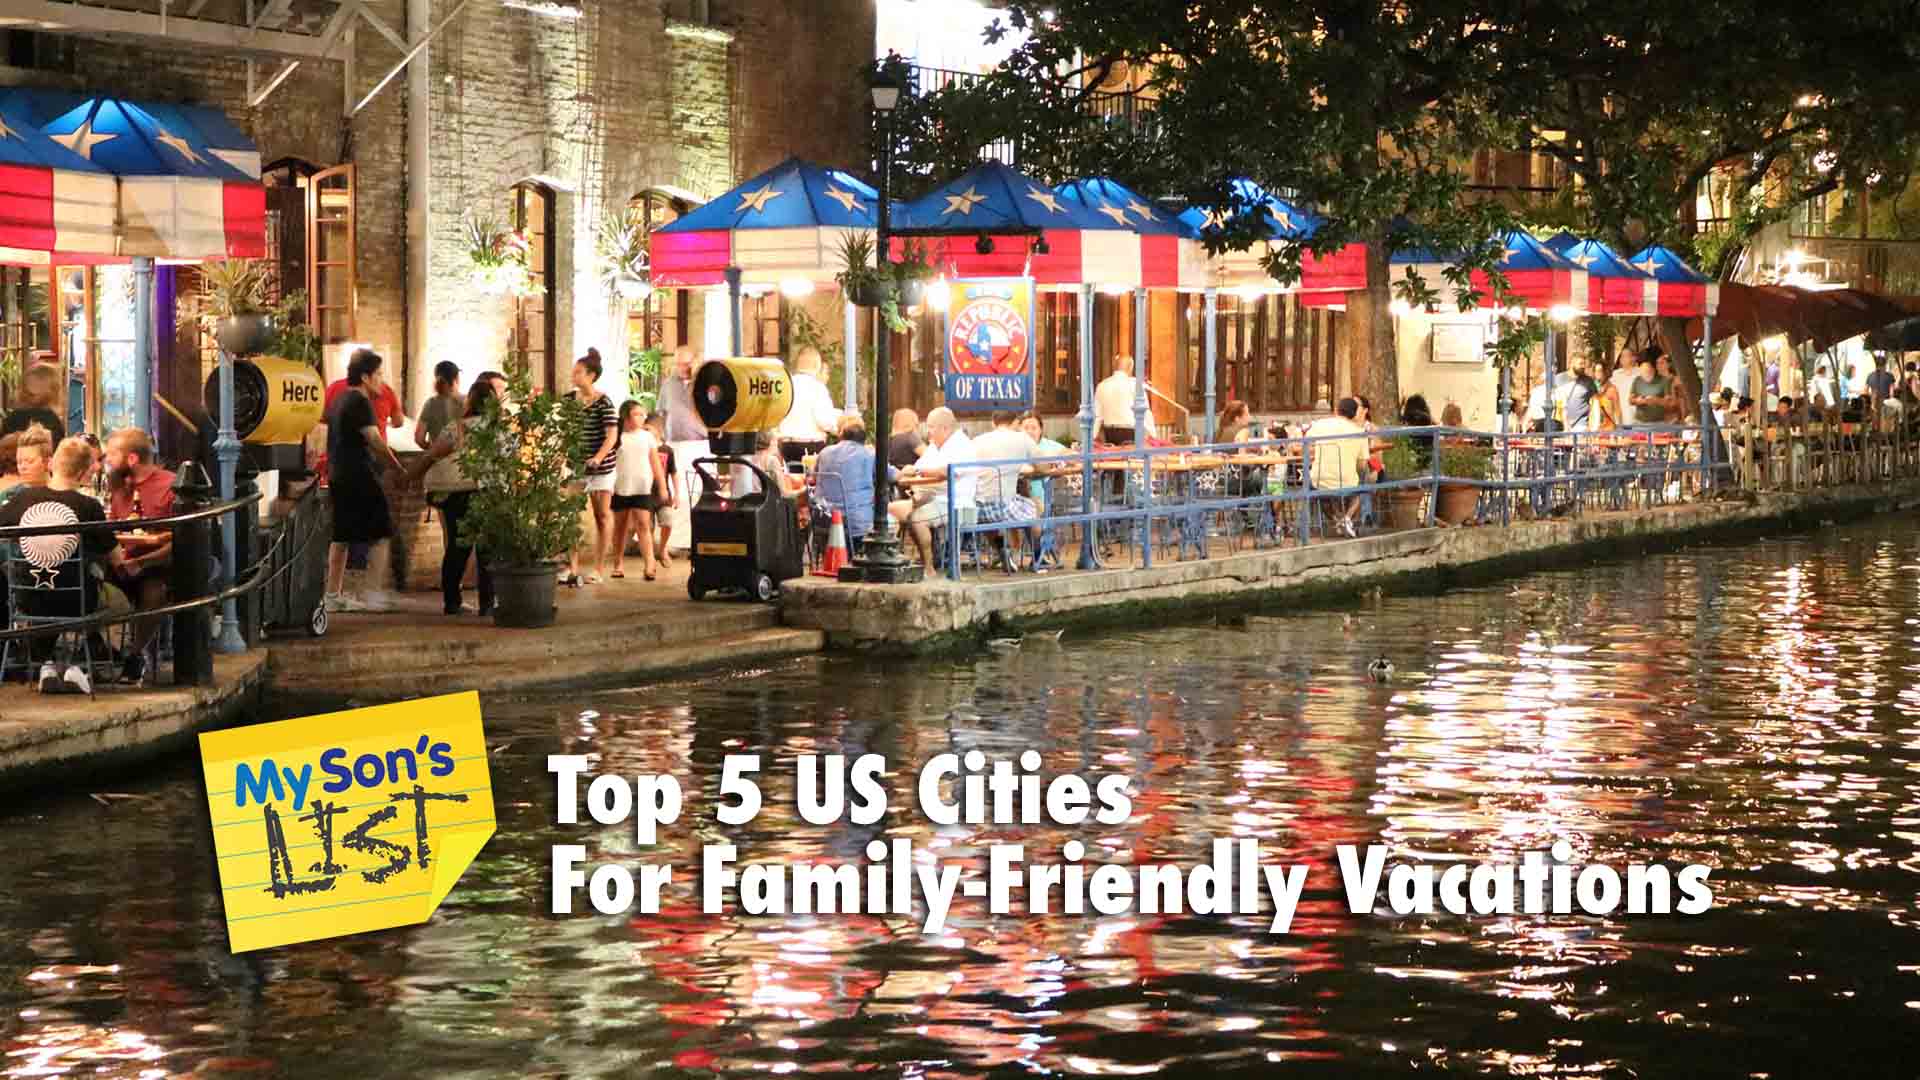 My Son's List of Top 5 US Cities For A Family-Friendly Vacation